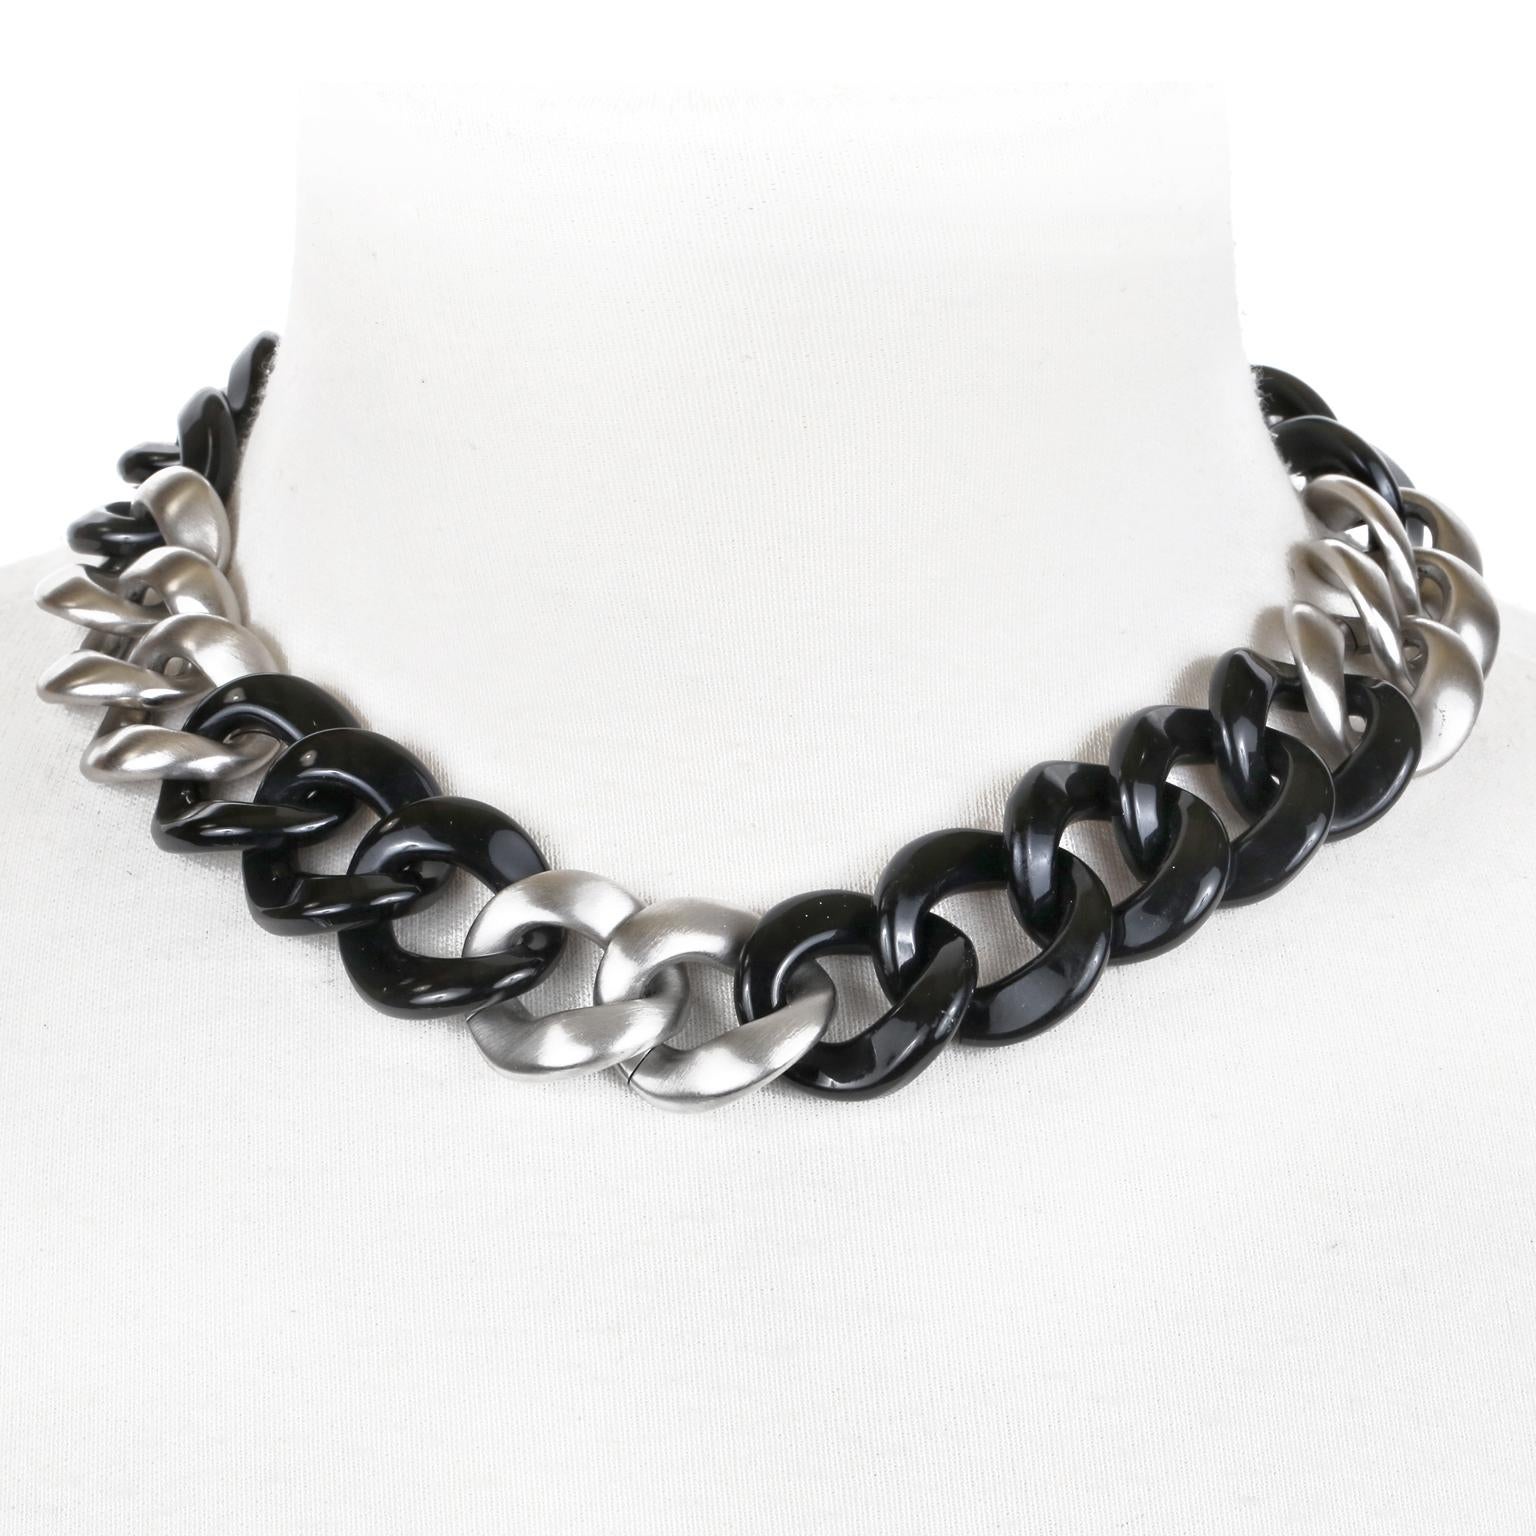 This authentic Chanel Silver and Black Resin Curb Chain CC Choker is in excellent condition.  Matte silver and black resin chunky curb chain design with interlocking CC charm at the clasp.   Approximately 17 inches.  Pouch or box included. 
